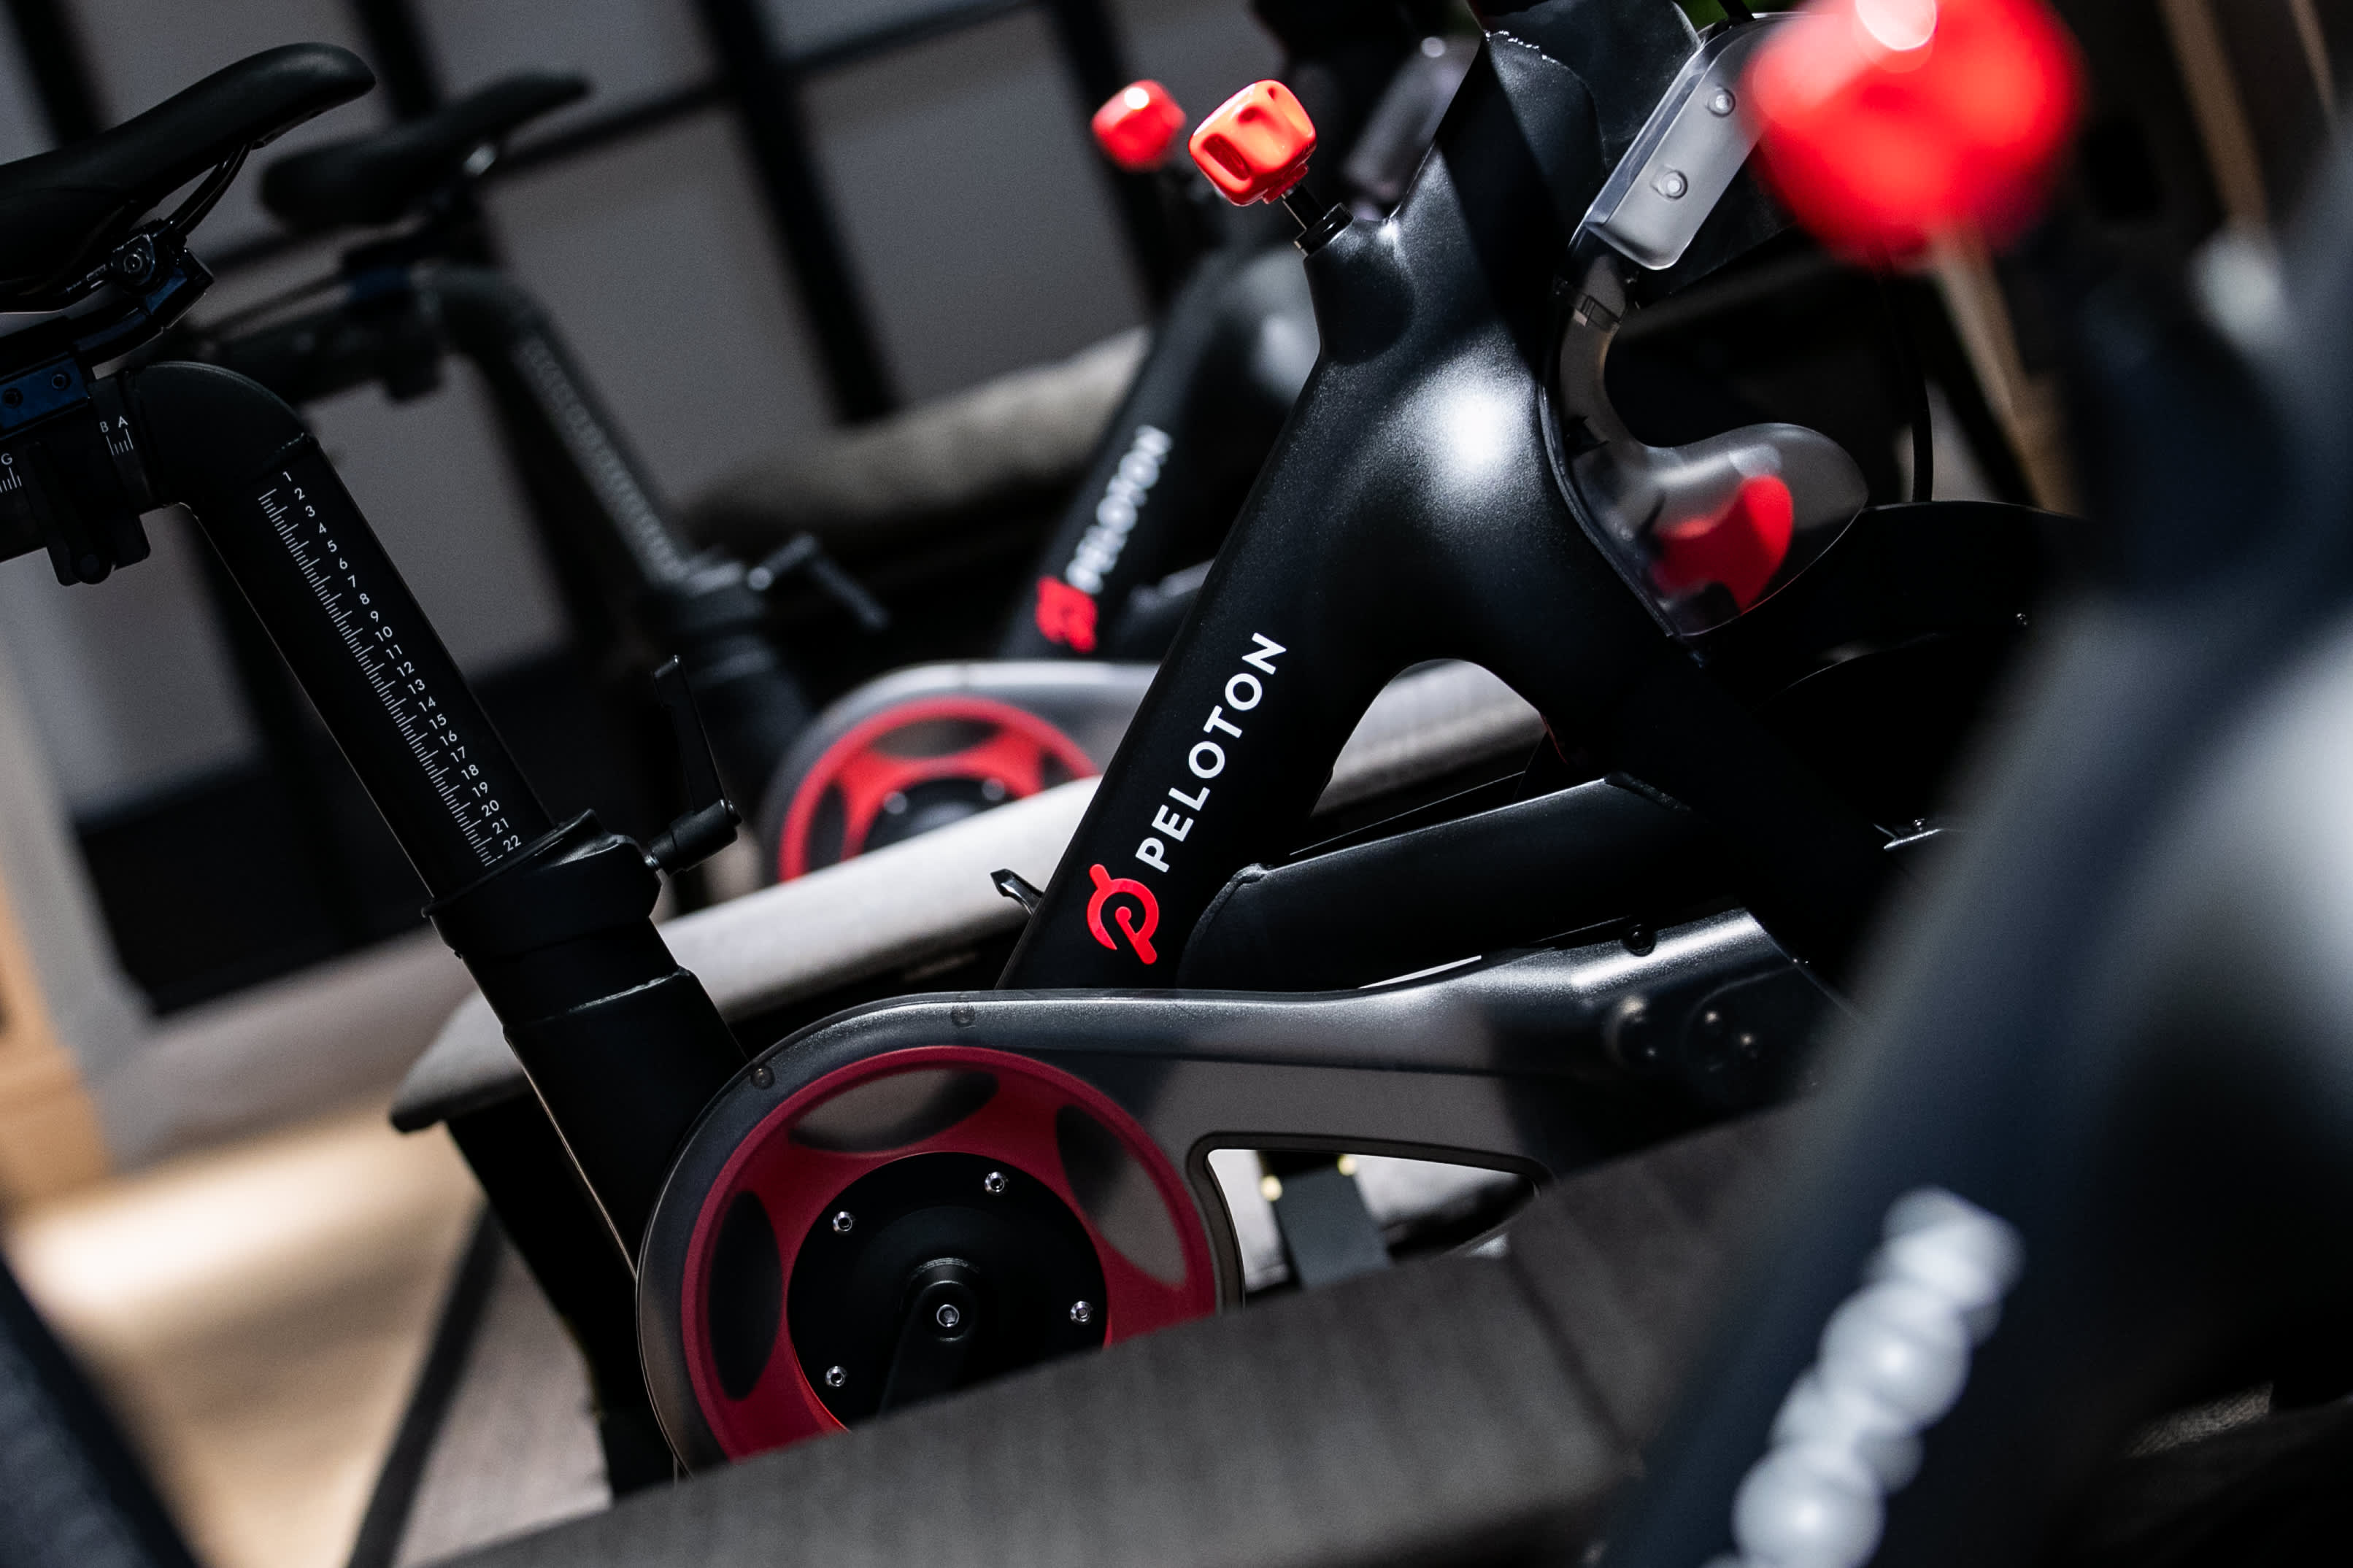 Peloton shares tank after cycle maker posts disappointing earnings and outlook; ..